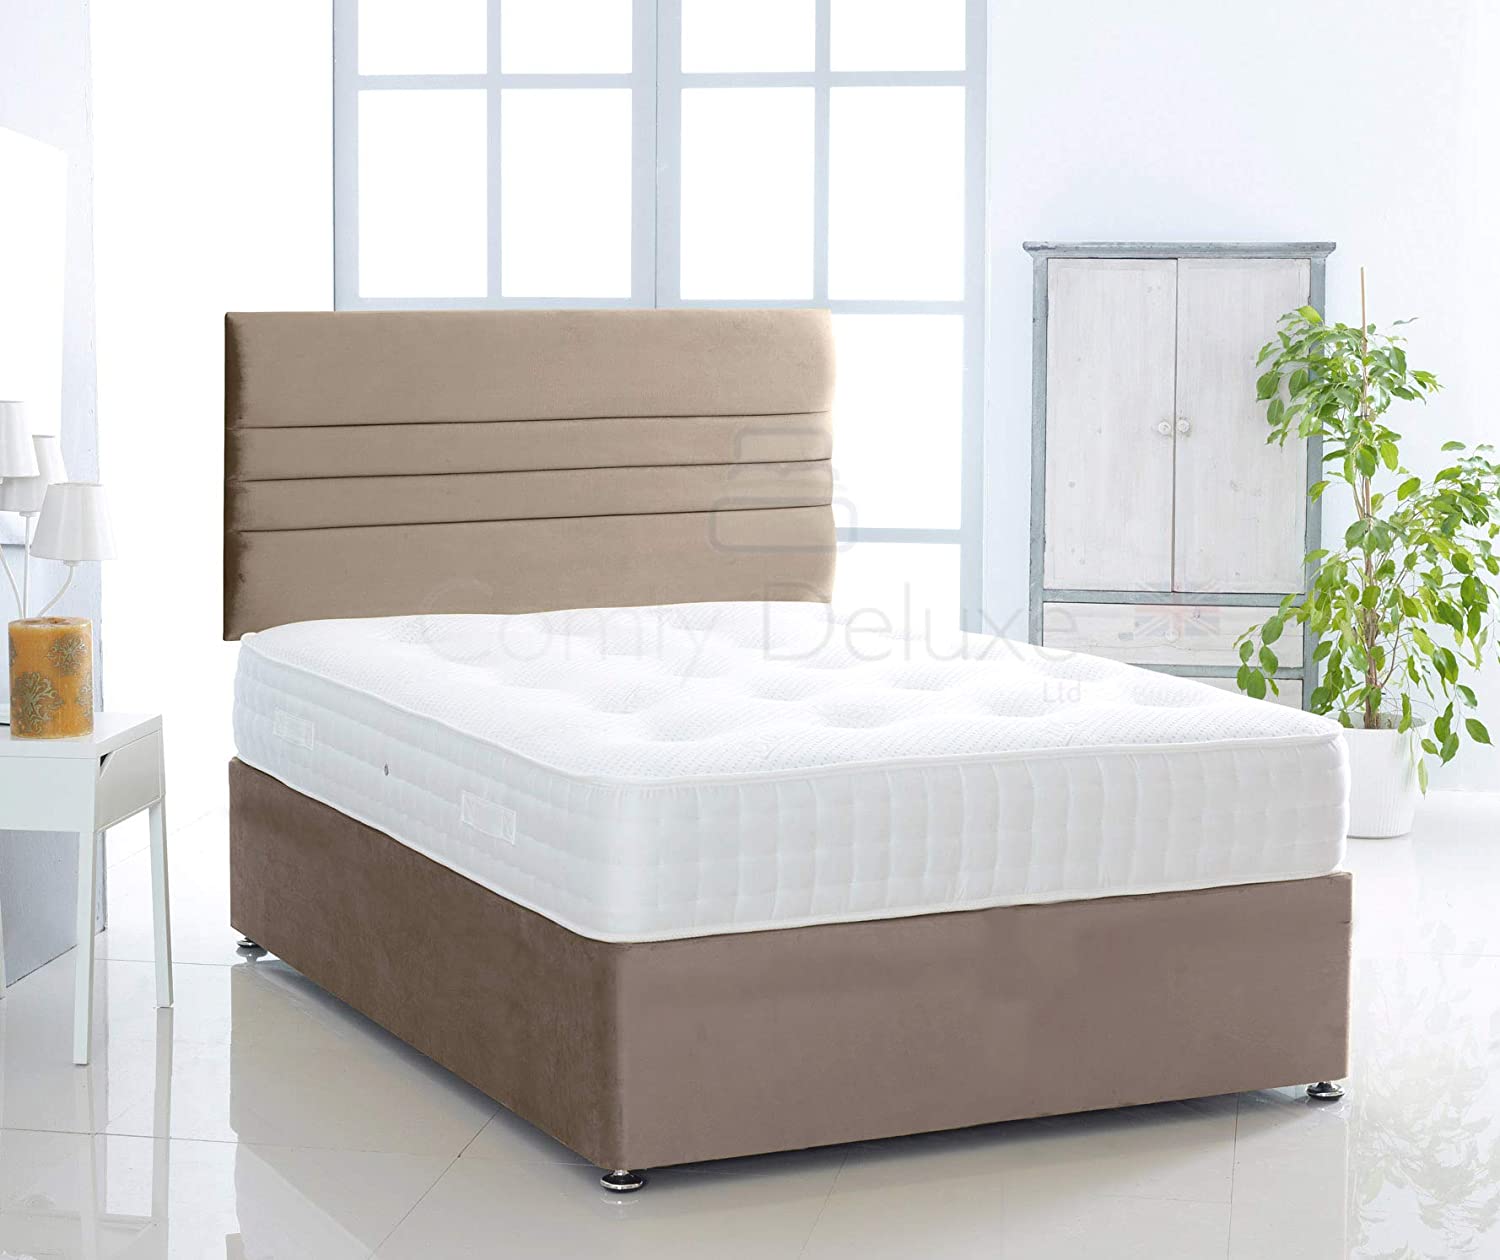 Coffee-Verona-Plush-Pocket-Divan-Bed-Set-Lined-Headboard-Storage-Drawers-Faux-Leather-Chenille-Soft-Velvet-Lined-Headboard-Pocket-Mattress-Soft-Firm-Medium-Firm-Glides